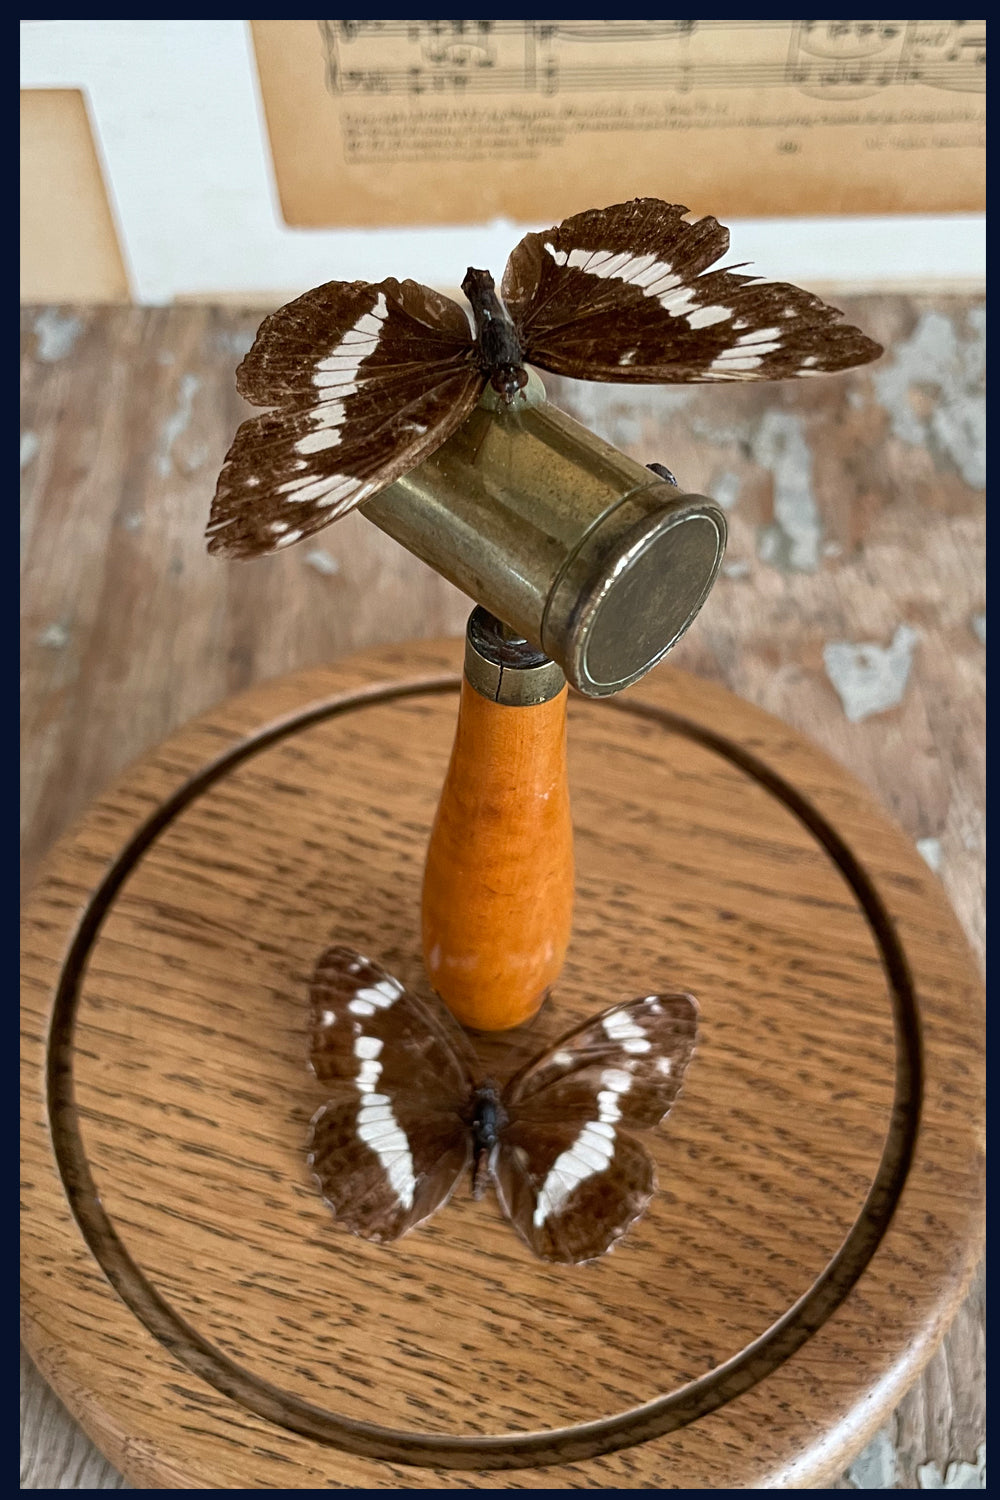 Enigma Variations Collection: Antique Hunting Brass & Wood 1800s Shot Measure with 2 Vintage Butterflies in a Glass Display Dome